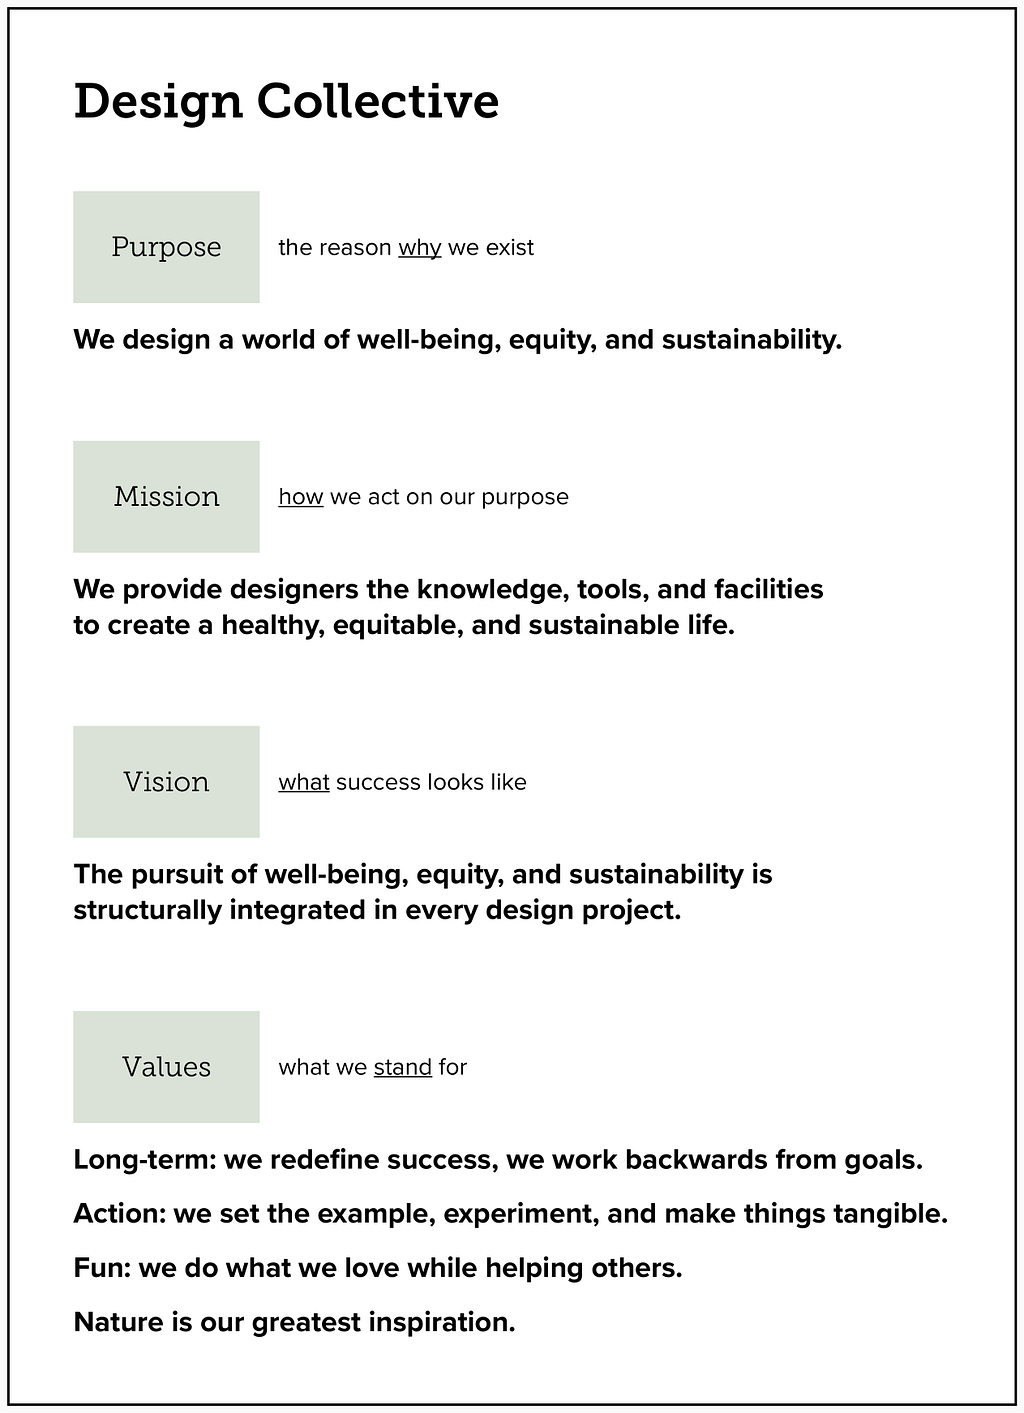 Overview of the motives of a design collective side-project: purpose, mission, vision, and values.